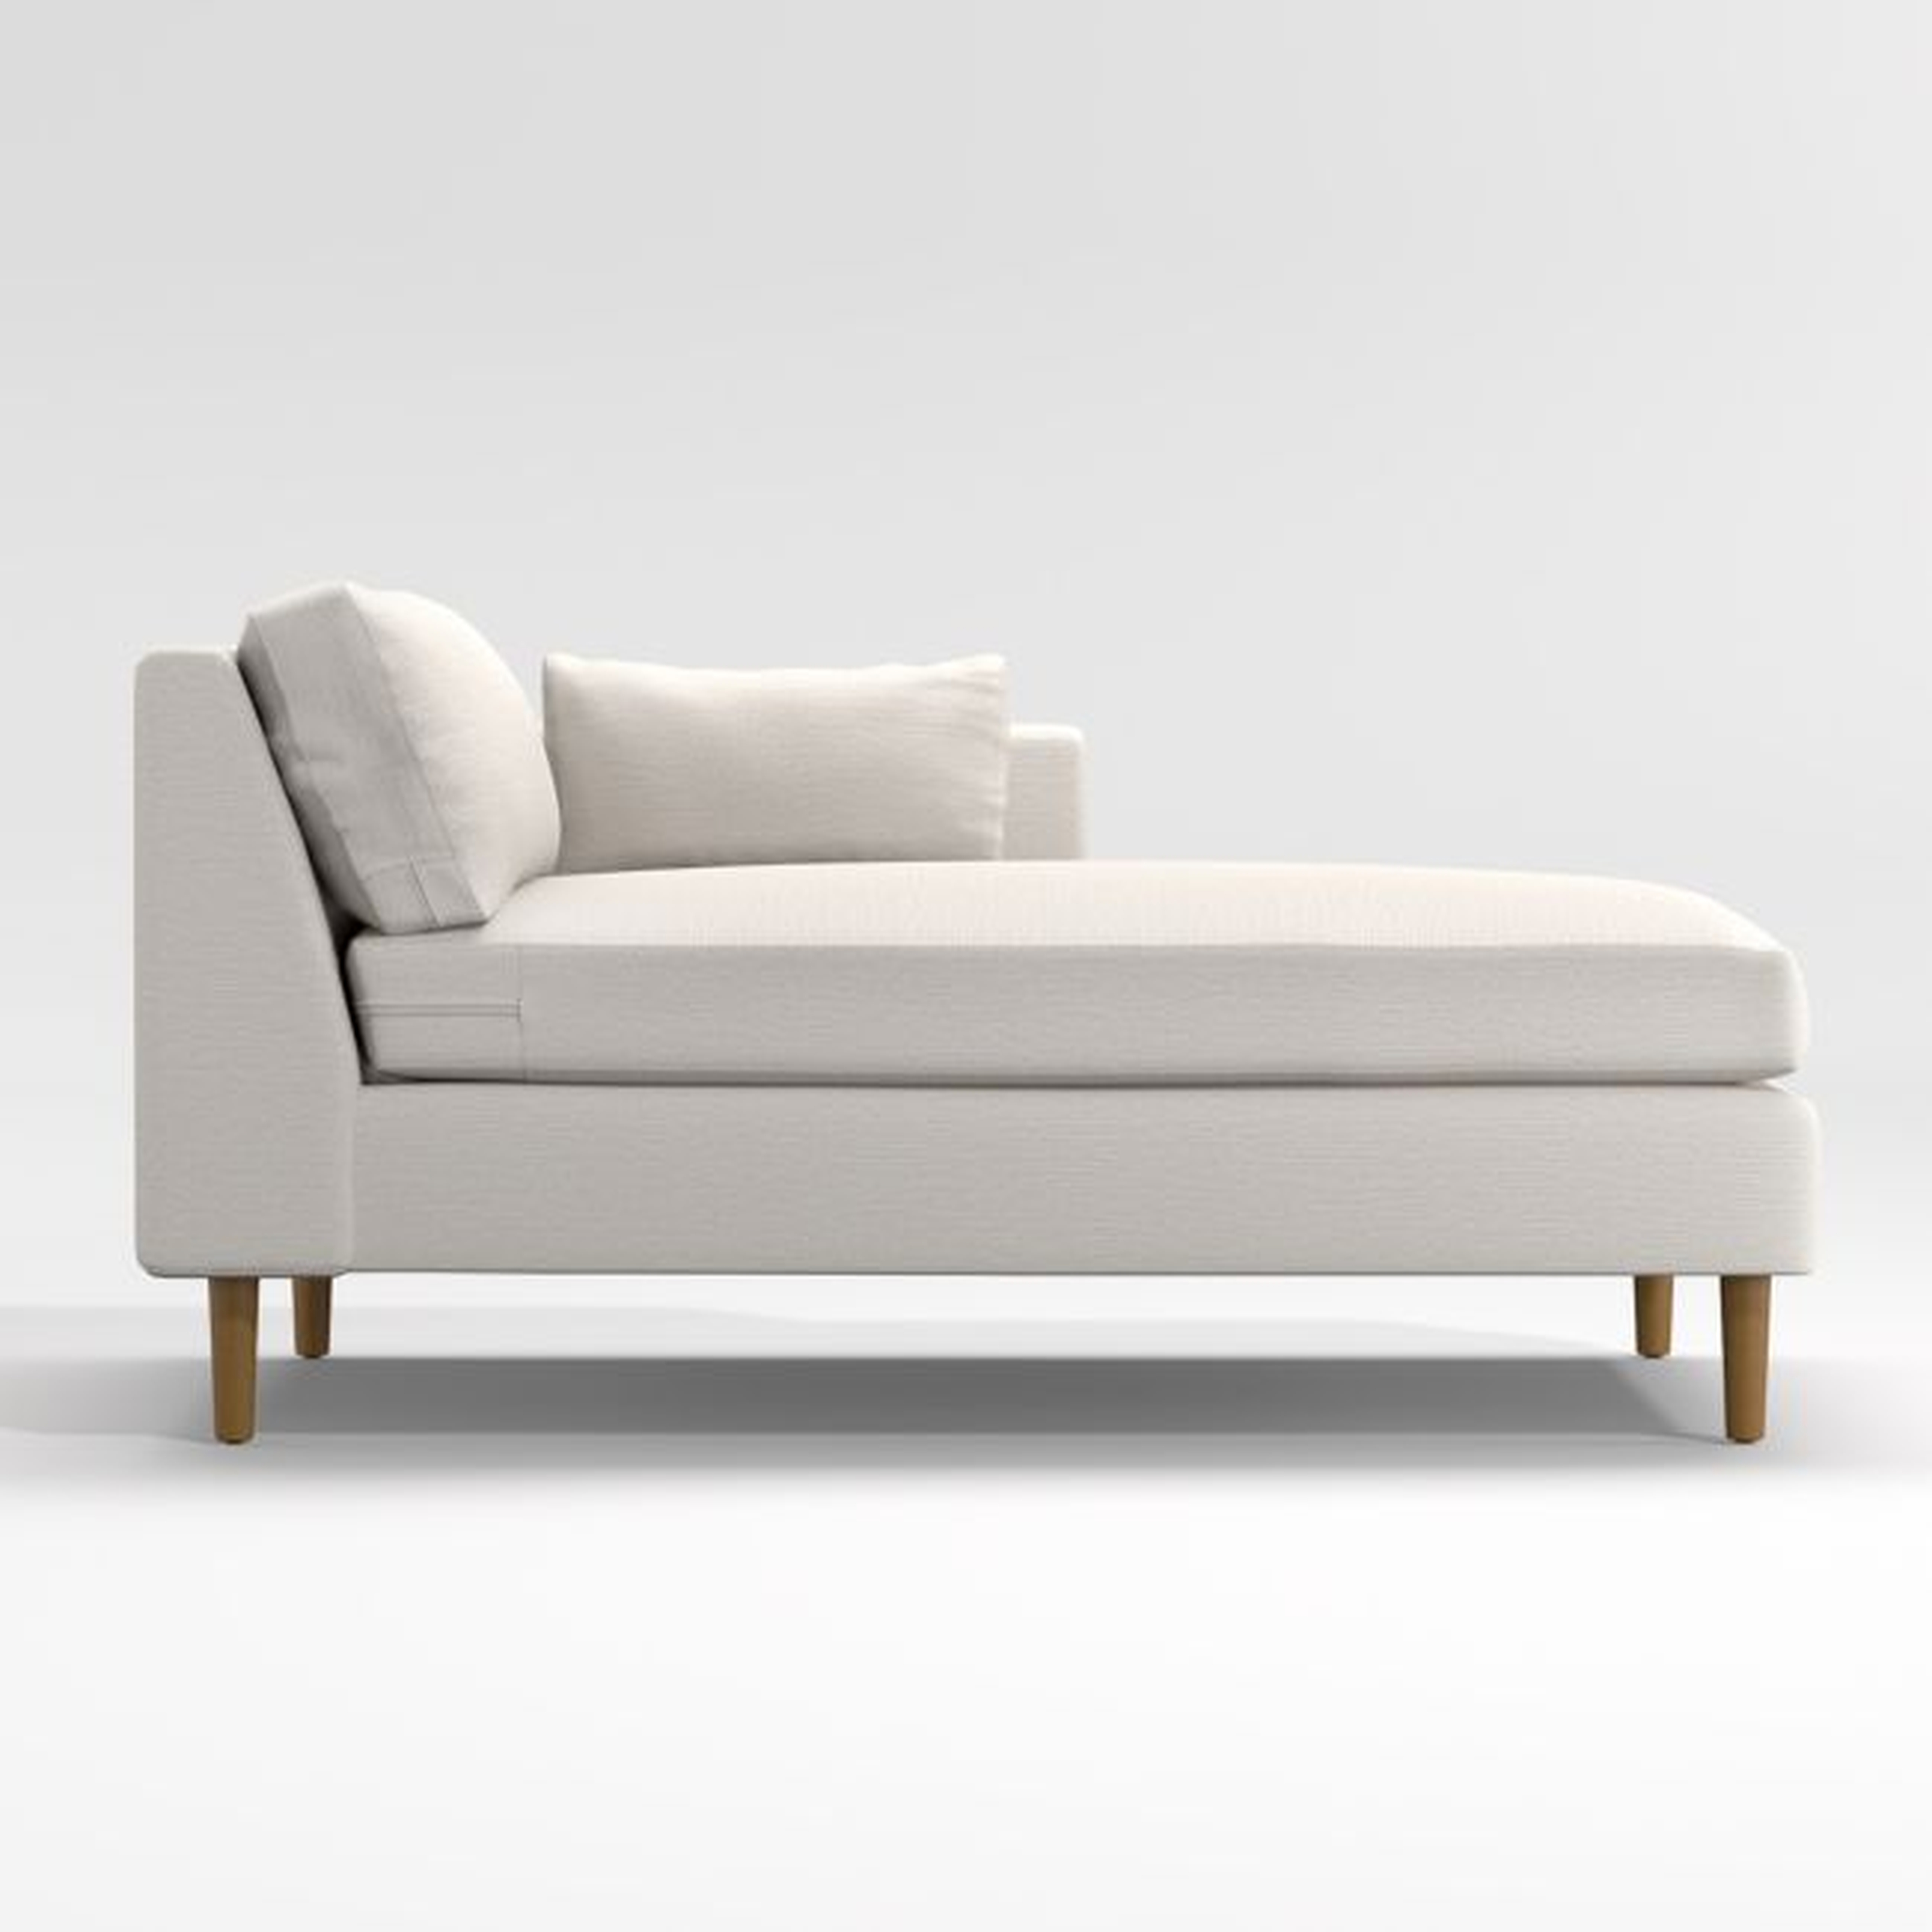 Avondale Wood Leg Right-Arm Chaise - Crate and Barrel